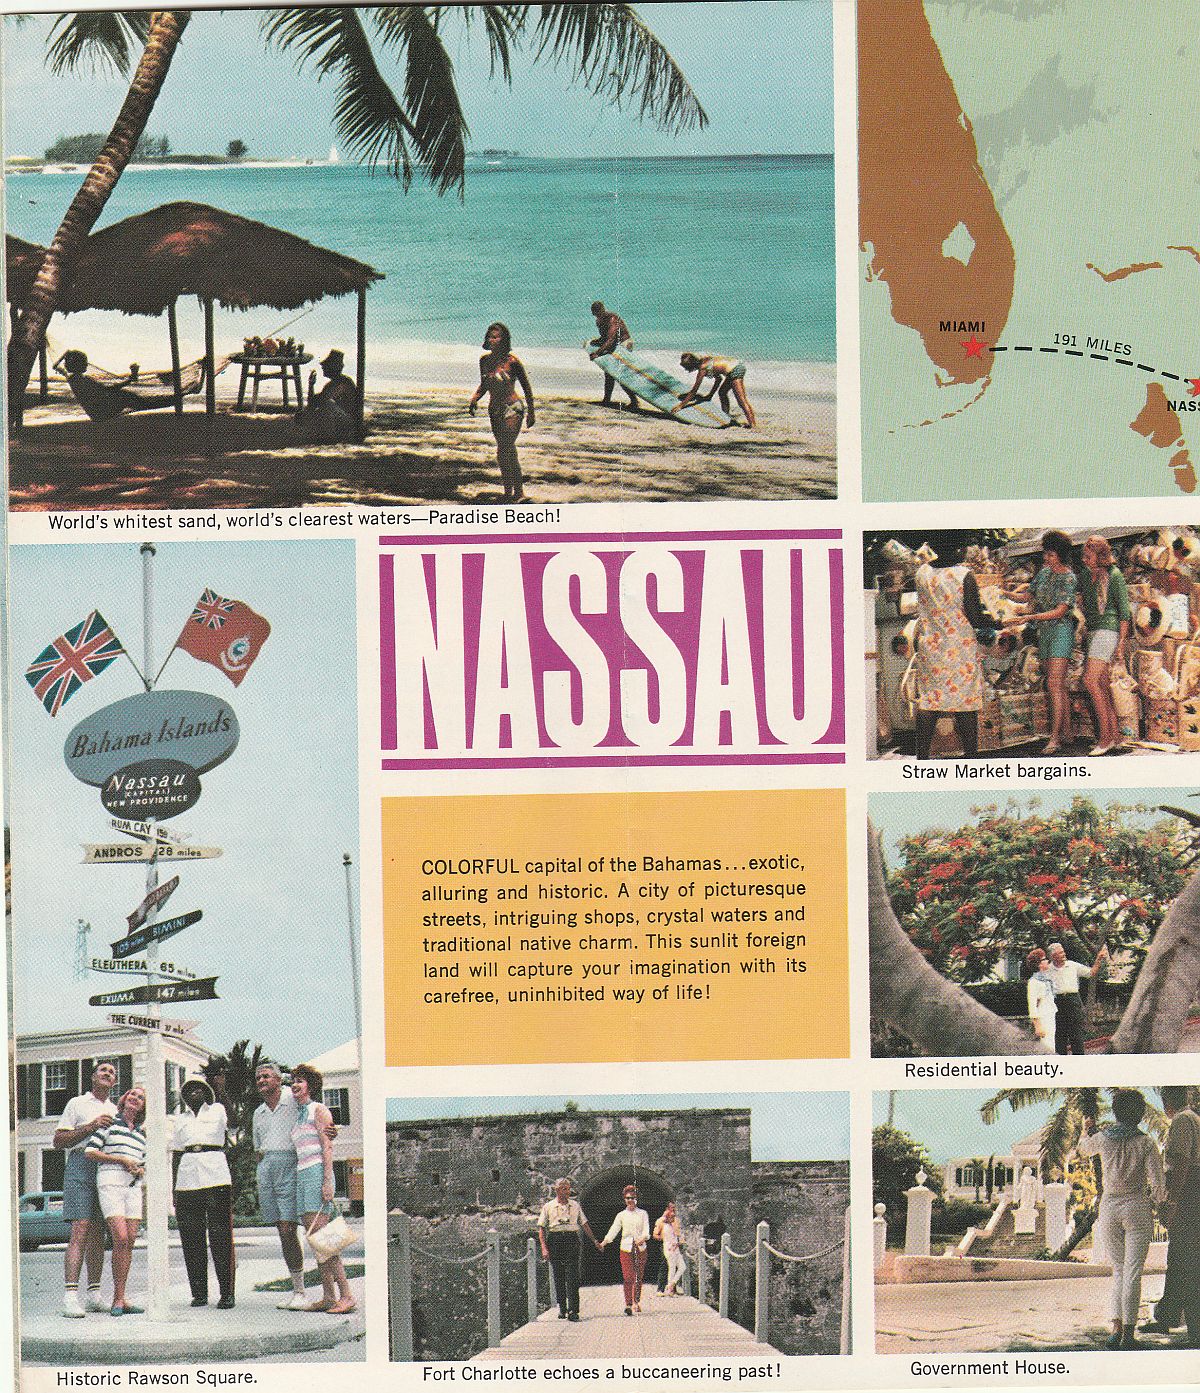 ss Florida About Nassau: Colorful capital of the Bahamas